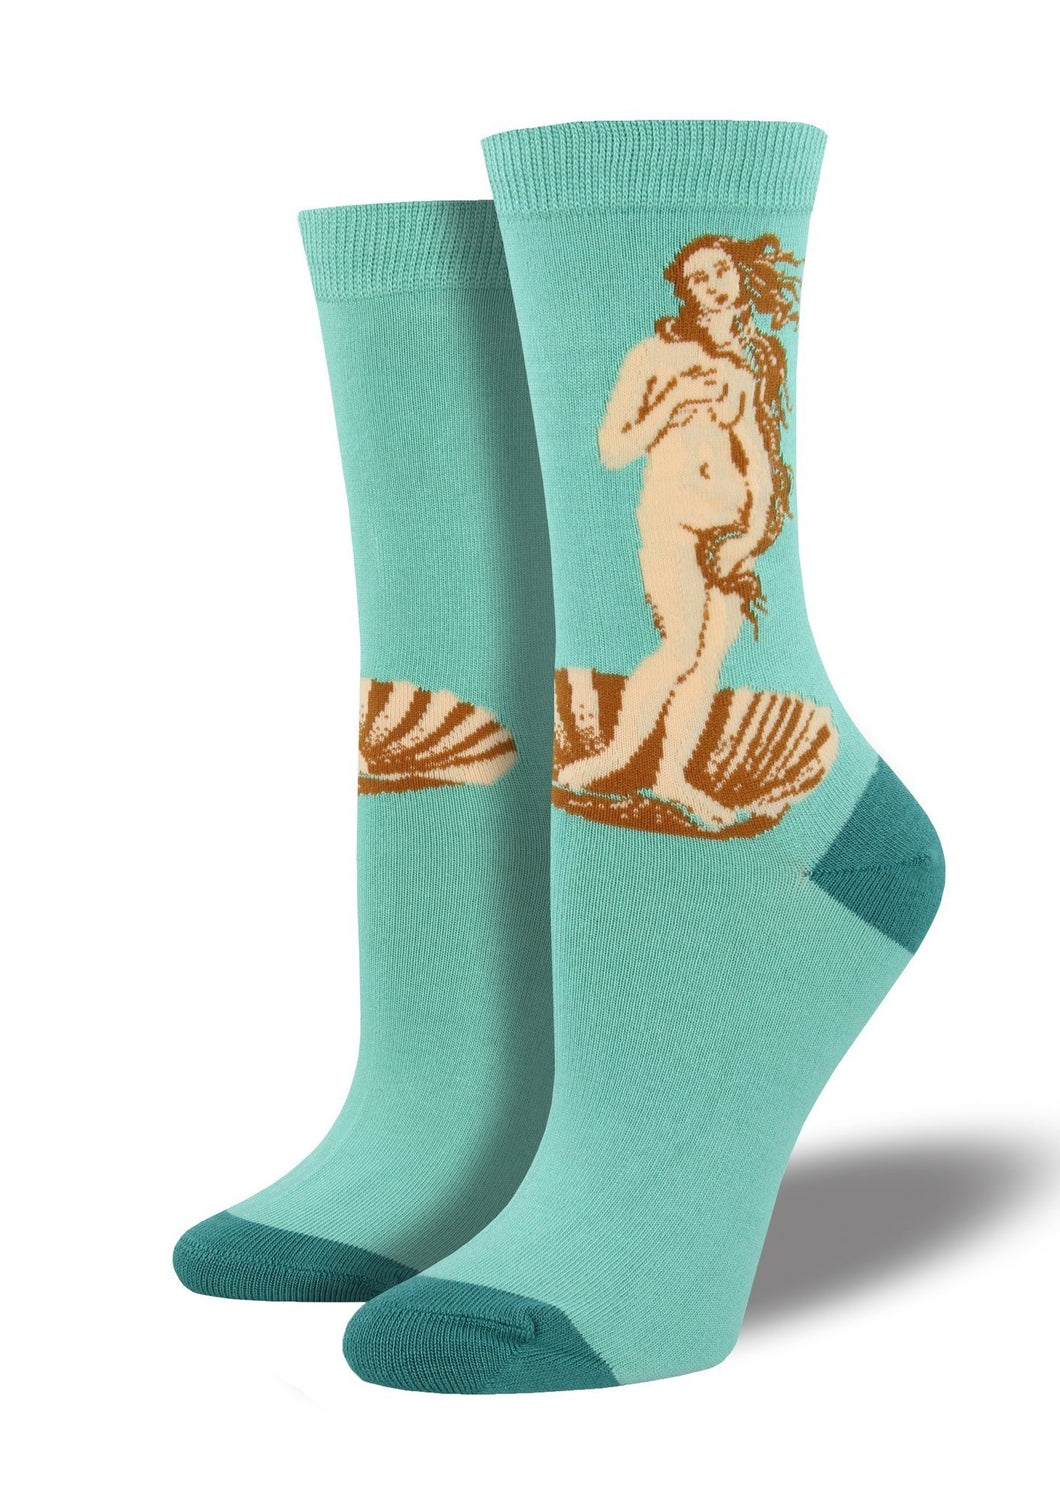 Teal Green with Venus Art. Soft, Breathable, Moisture Wicking, Antibacterial, Hypoallergenic, Amazing Socks! One Size Fits Most (Women's 5-11) Fabrication: 66% Rayon from Bamboo, 32% Nylon, 2% Spandex SockSmith $20.00